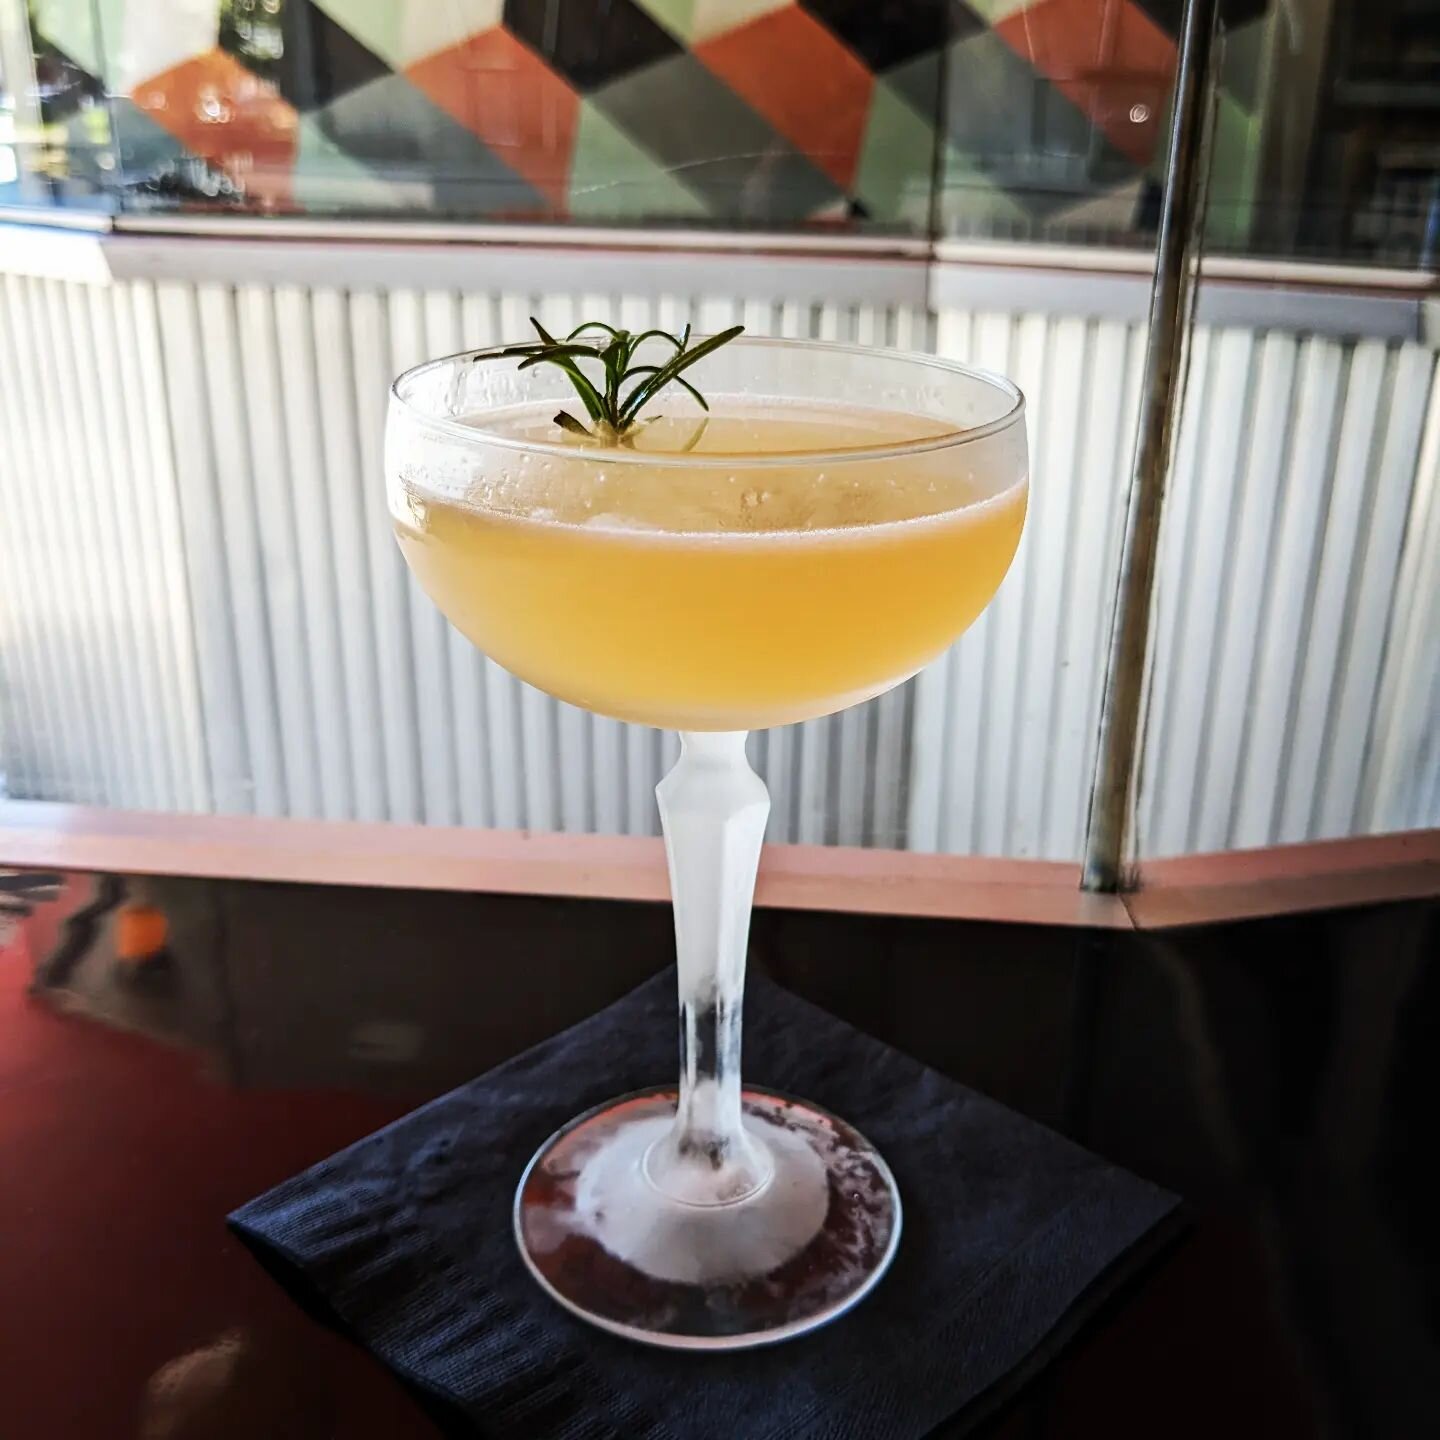 It's $10 Tuesday at The Dime. Sink into the &quot;Dreams of the Idol,&quot; featuring The Botanist Islay Dry Gin, Greenbar Poppy Amaro, simple, grapefruit and lemon juices, and Scrappy's Lime Bitters. Bright, bittersweet and herbaceous.